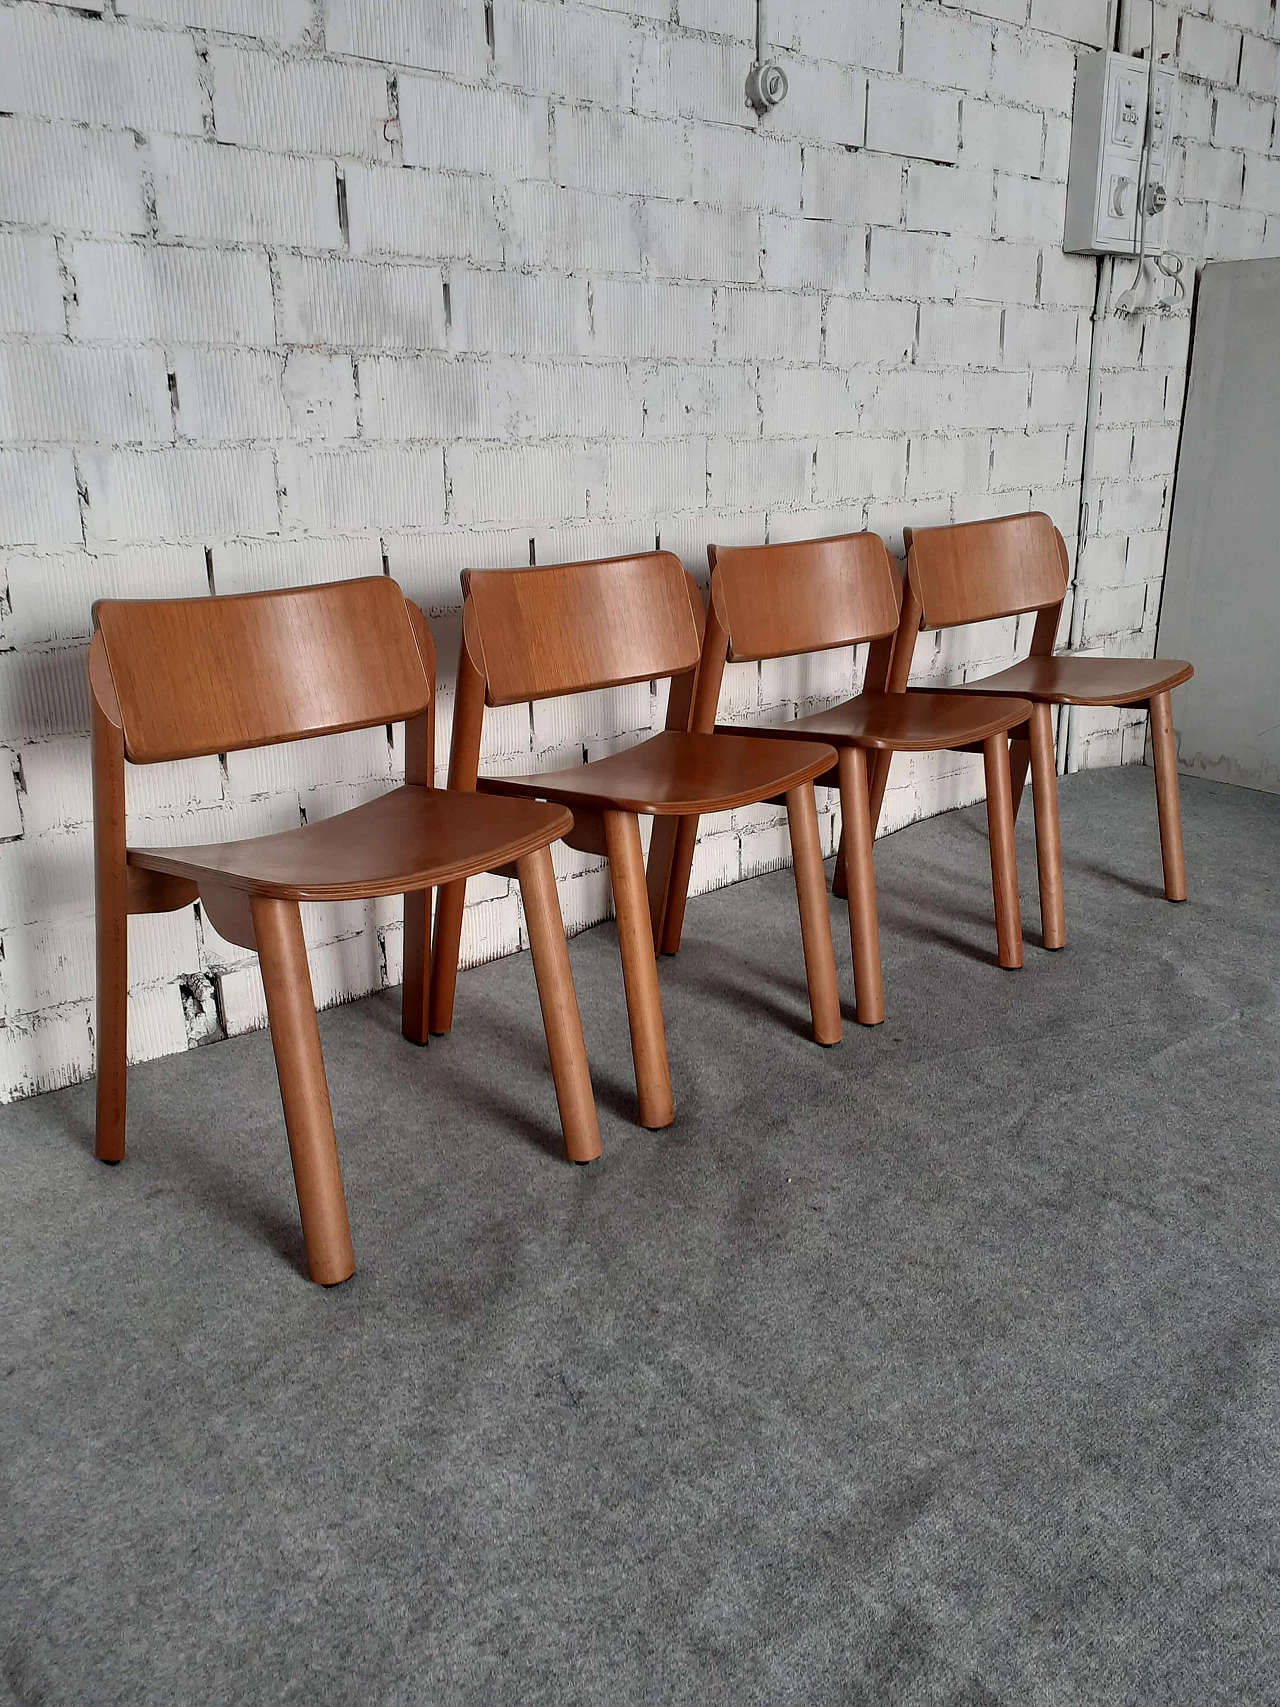 4 Wooden chairs, 1970s 1